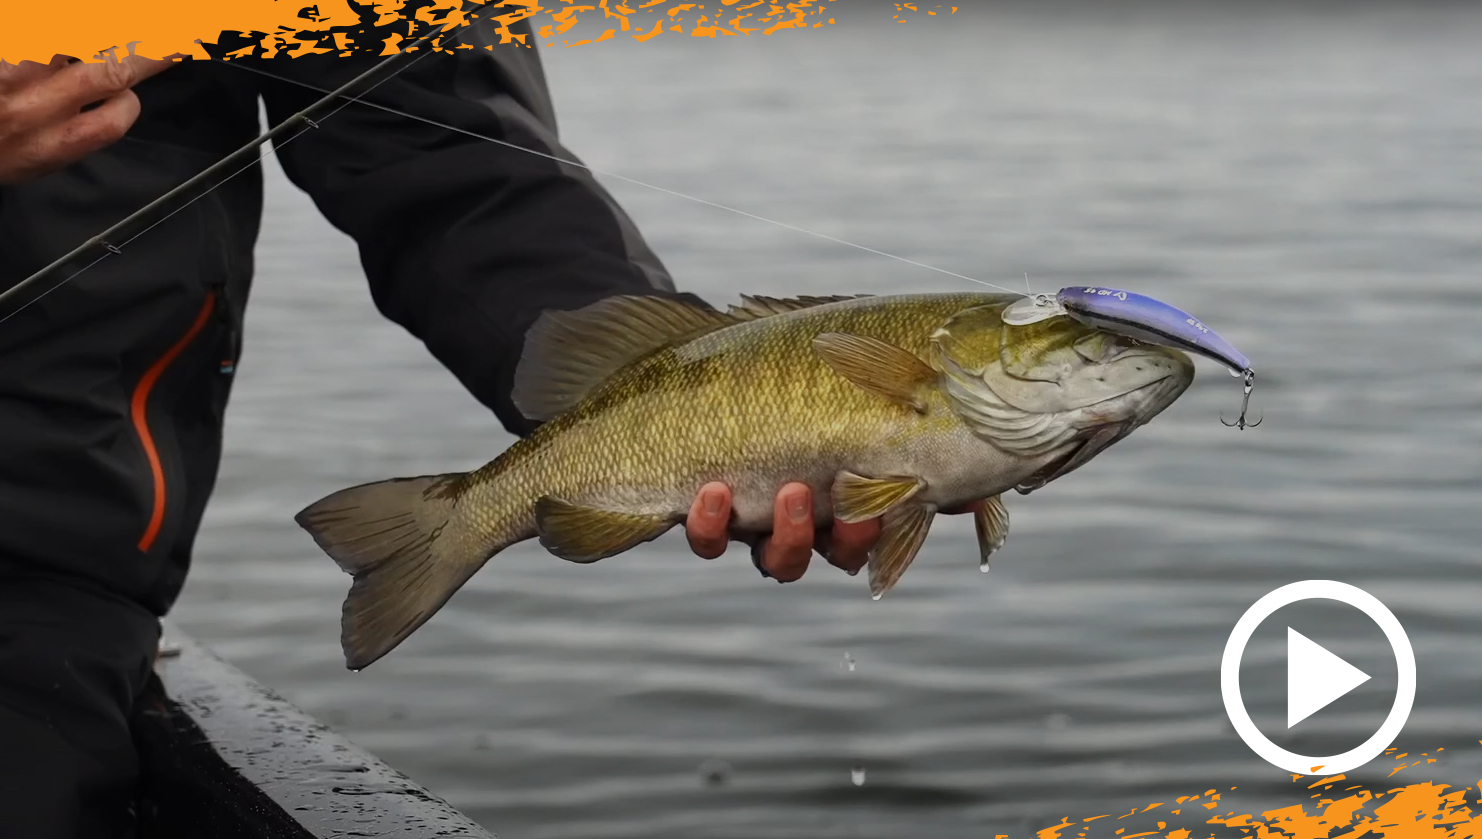 SMALL MOUTH BASS WITH DANNY HERBECK